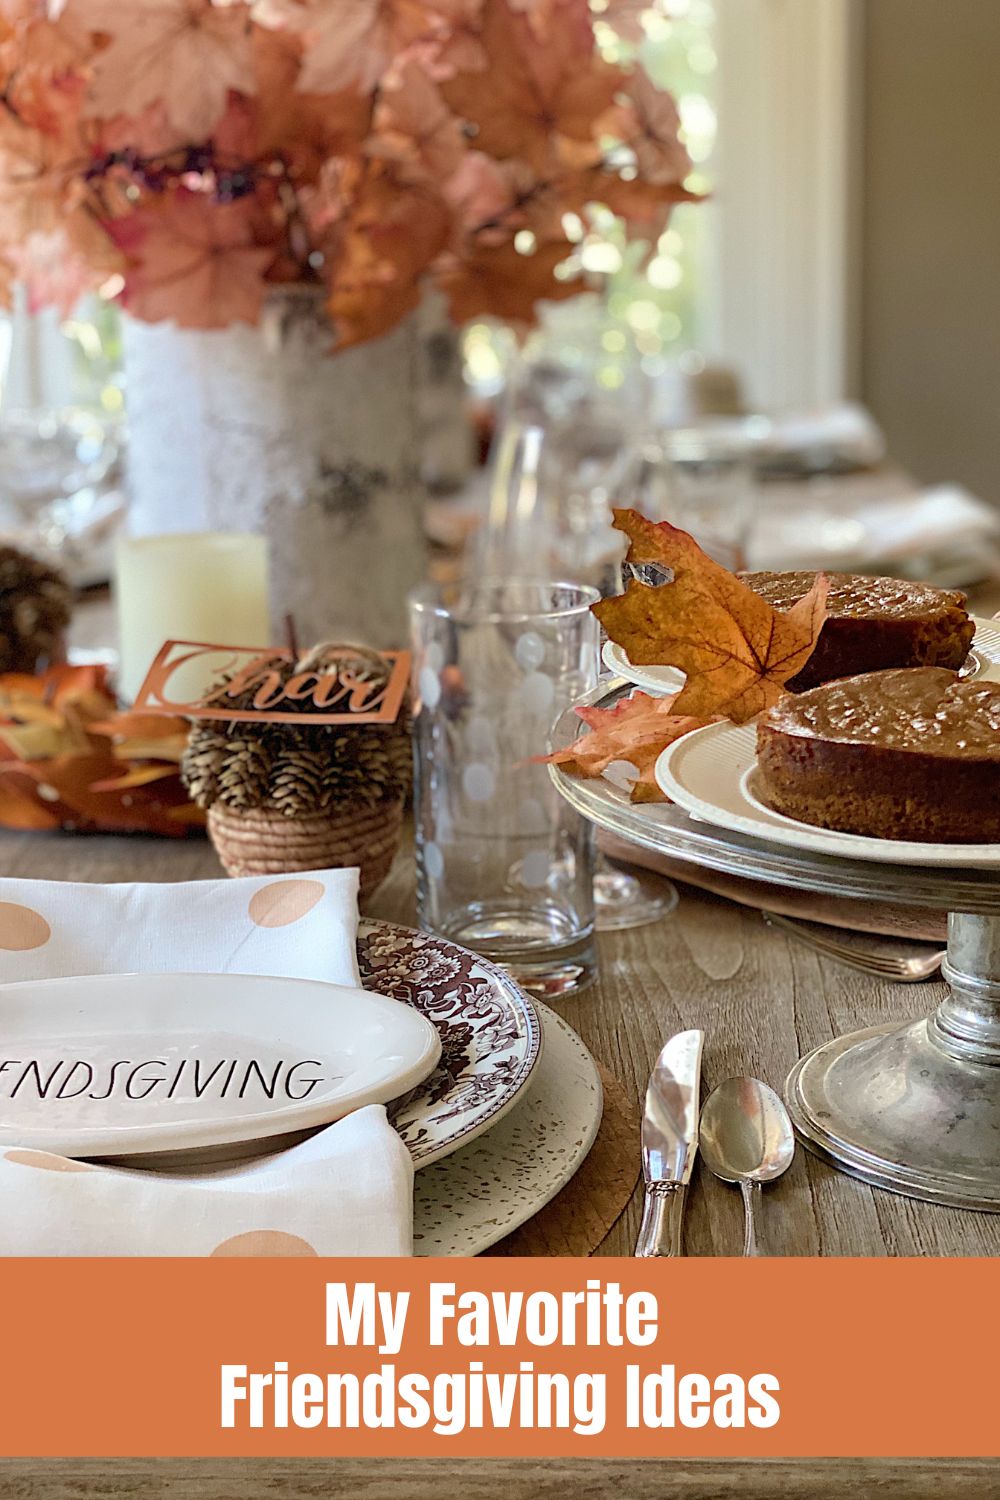 Have you ever thought about hosting a Friendsgiving dinner? I am sharing some fun Friendsgiving ideas and DIY's so you can host one too.